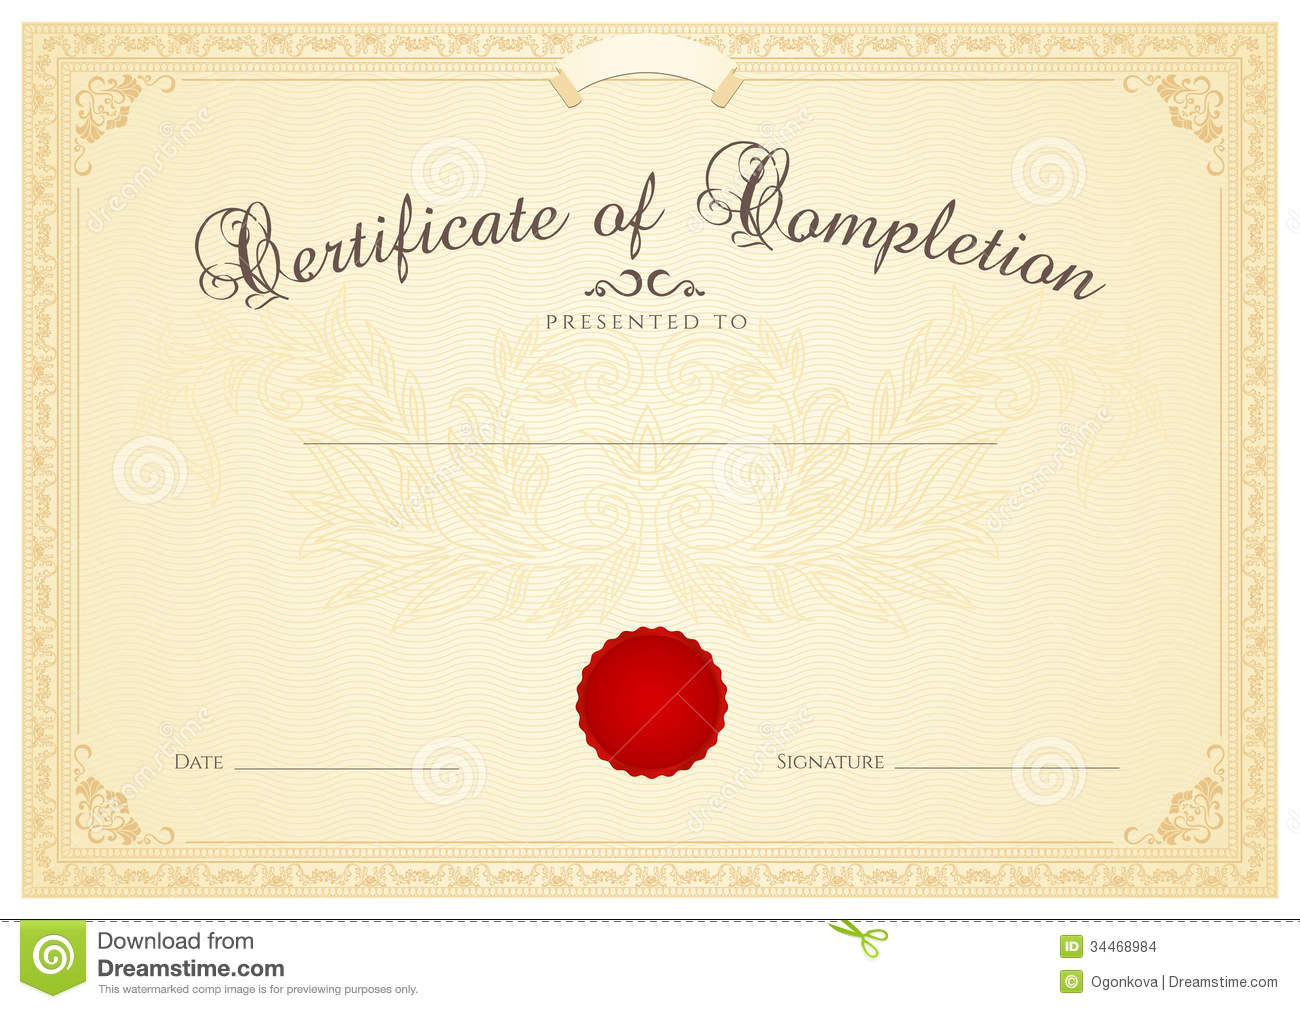 Certificate / Diploma Background Template. Floral Stock Vector within Certificate Scroll Template